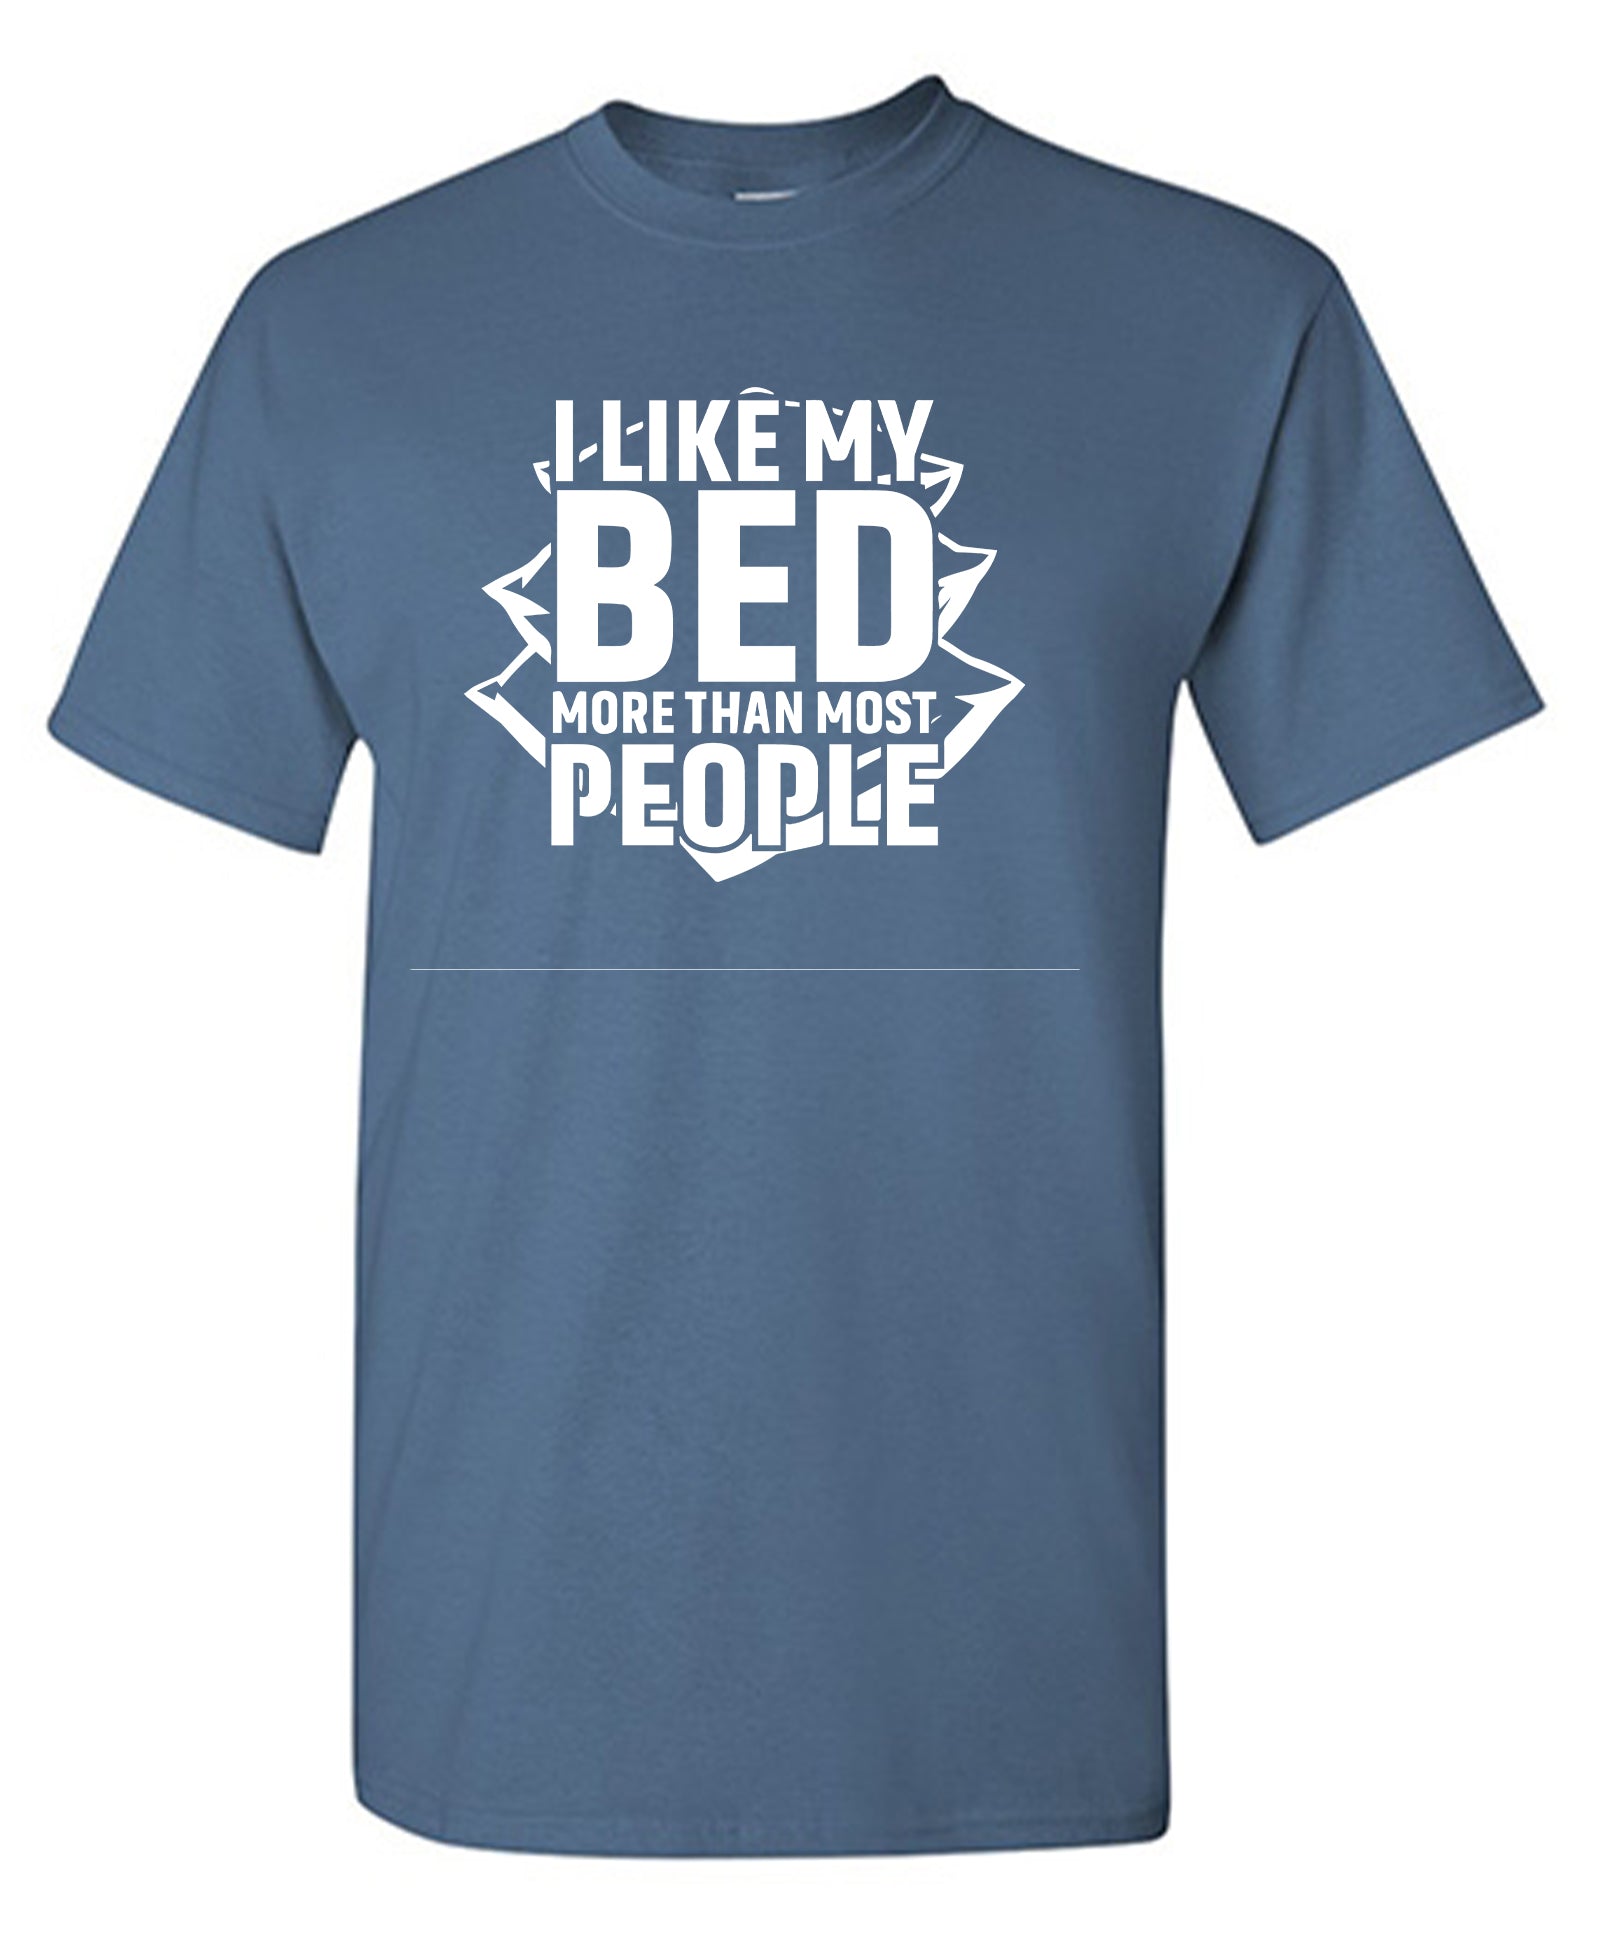 I Like My Bed More Than Most People - Funny T Shirts & Graphic Tees